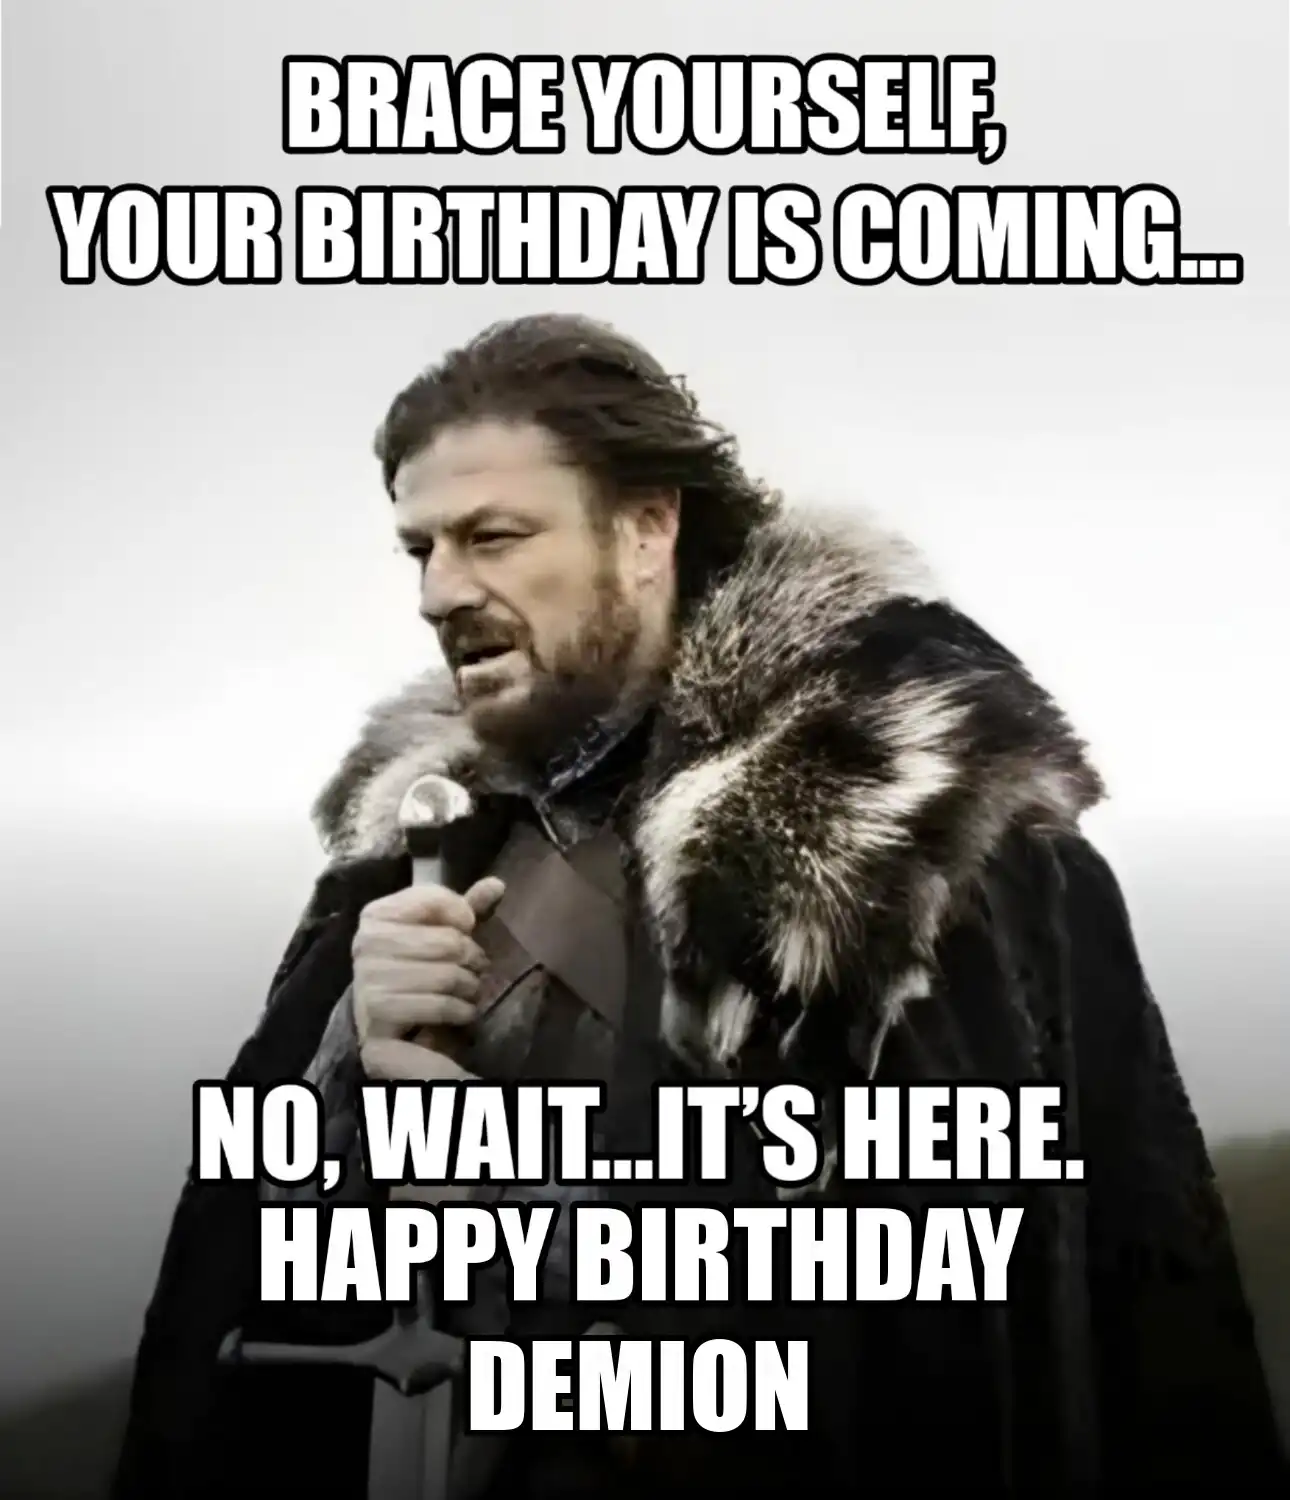 Happy Birthday Demion Brace Yourself Your Birthday Is Coming Meme